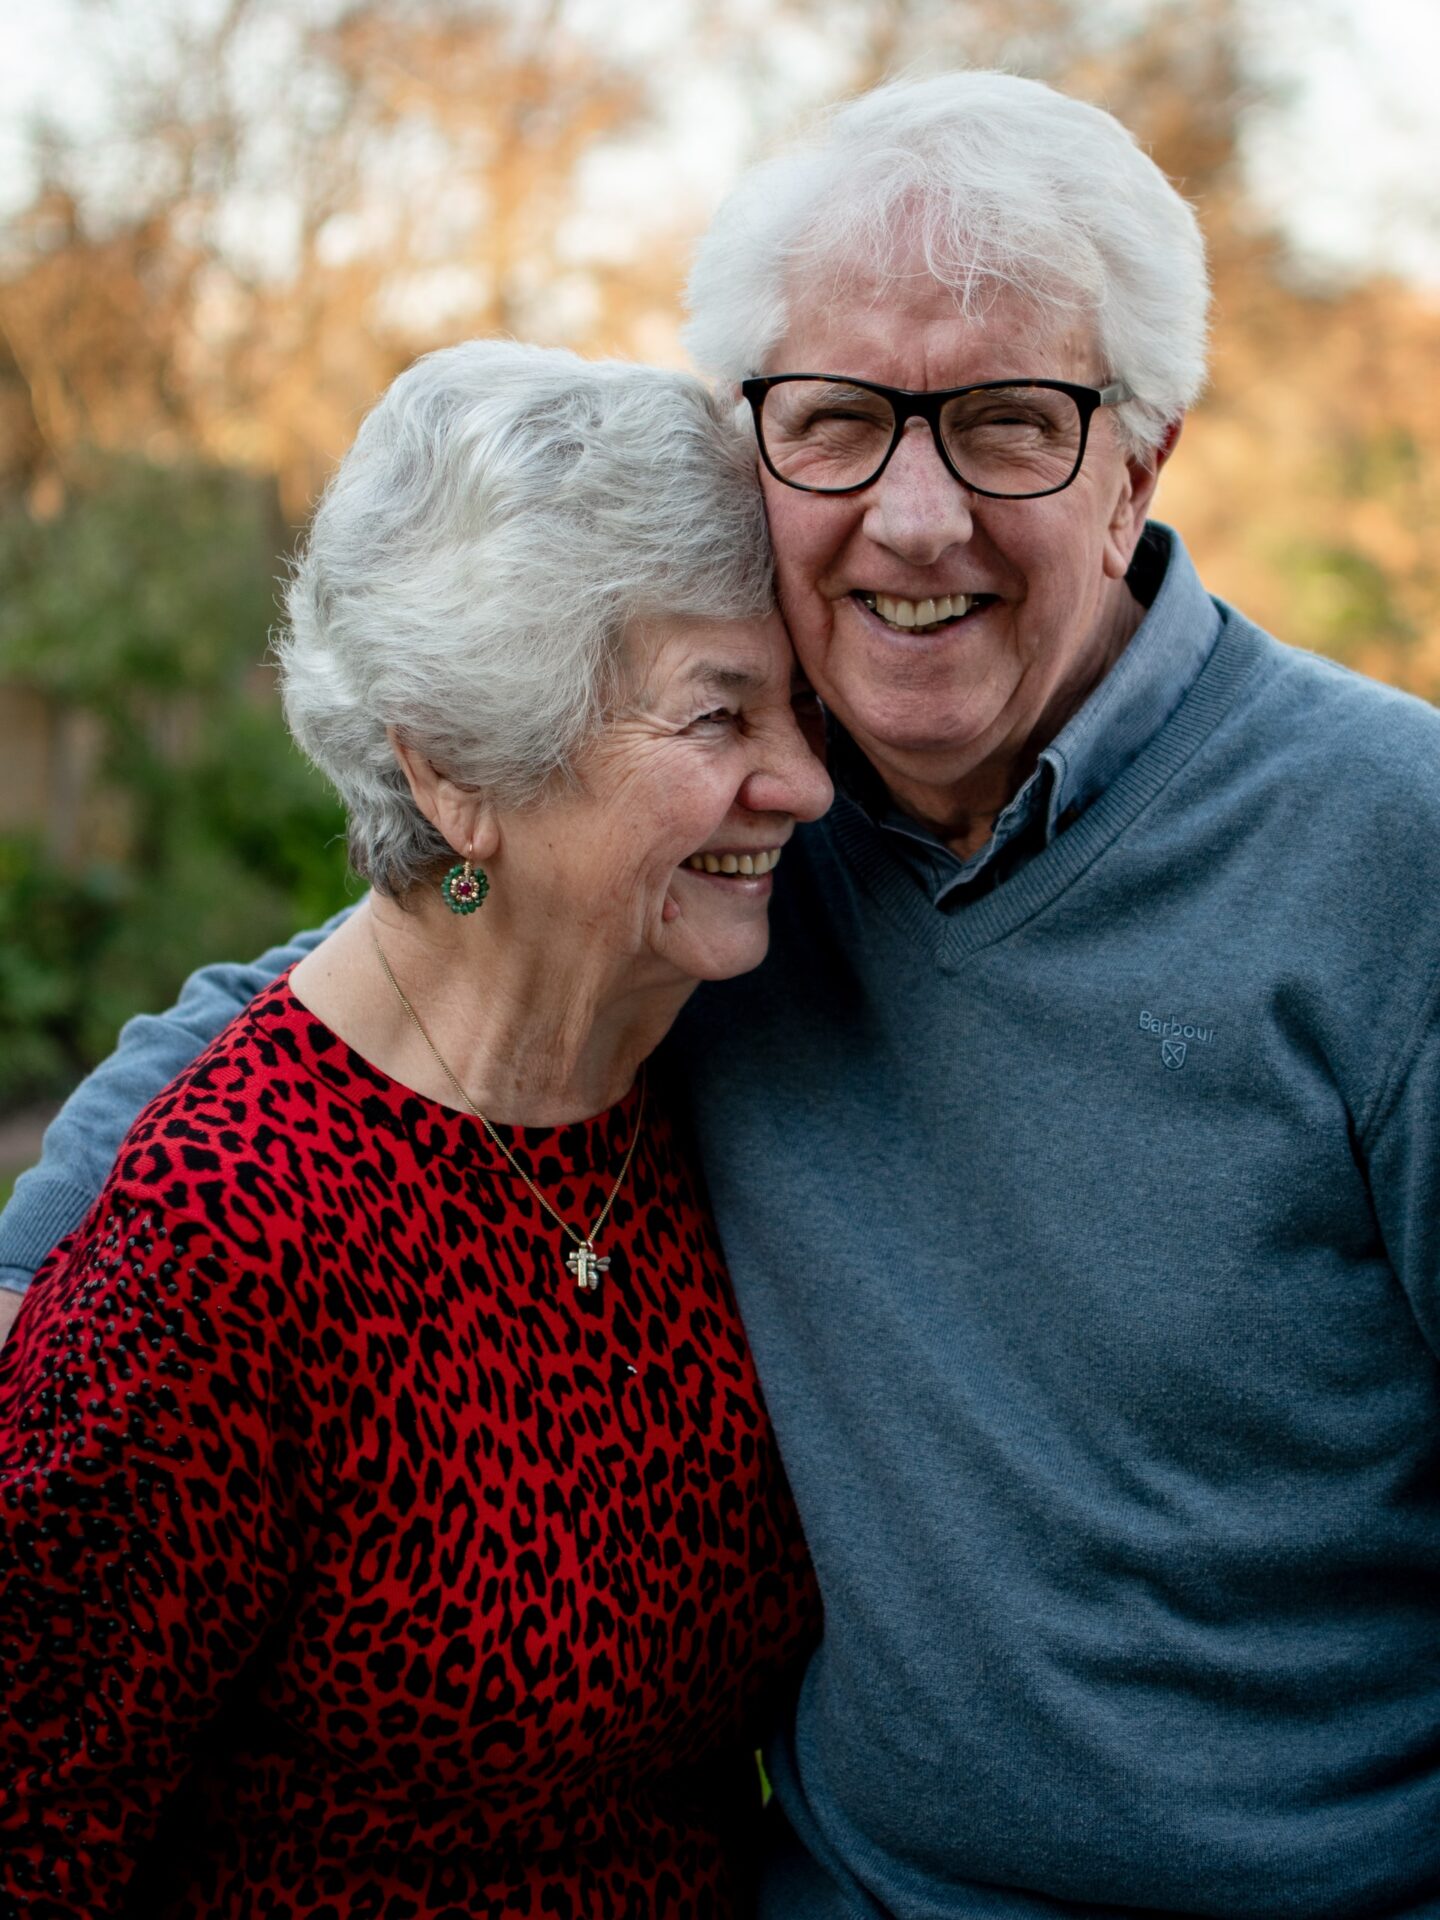 Elderly couple smiling while hugging each other